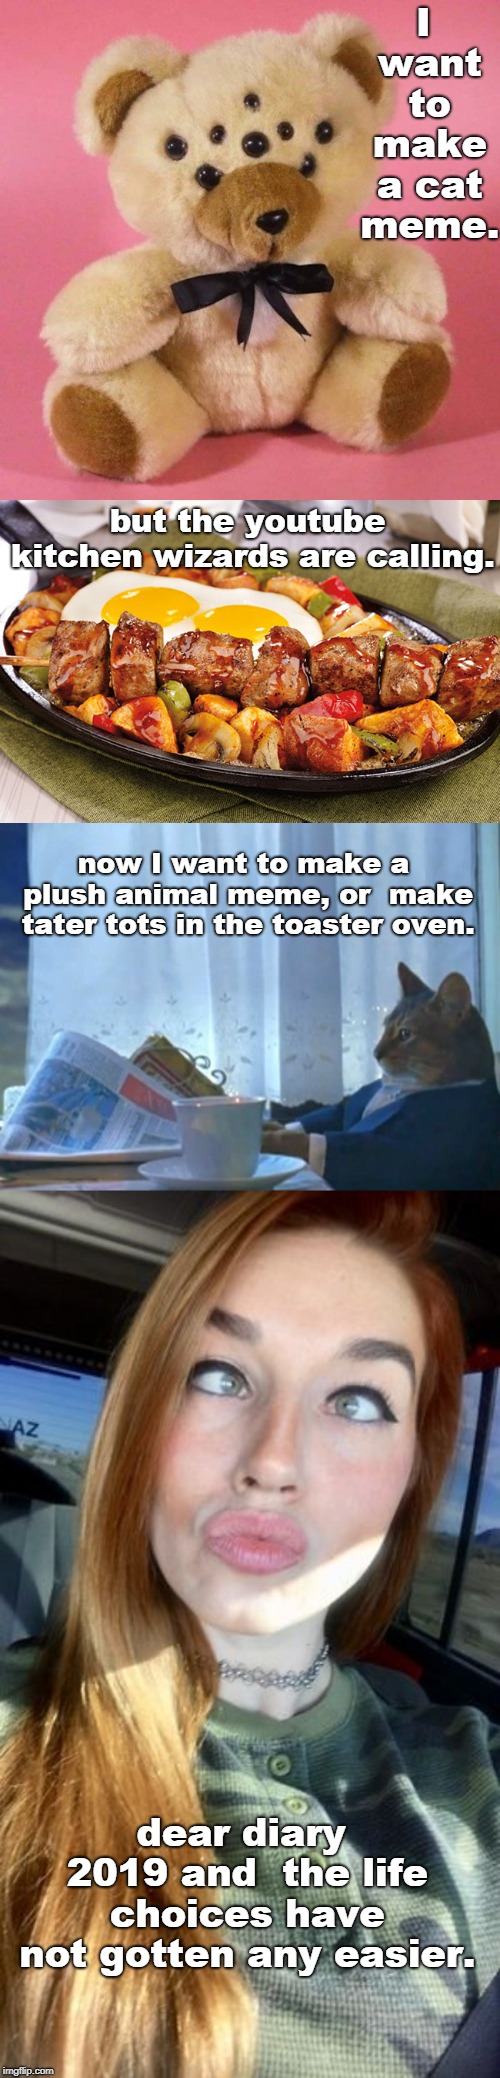 plush animals should  not have more than two eyes.that can confuse mortals and the cat but not the youtube chefs.they rock. | I want to make a cat meme. but the youtube kitchen wizards are calling. now I want to make a plush animal meme, or  make tater tots in the toaster oven. dear diary 2019 and  the life choices have not gotten any easier. | image tagged in breakfast skillet,buy a boat cat,youtube chefs,memes,confusing 2019 | made w/ Imgflip meme maker